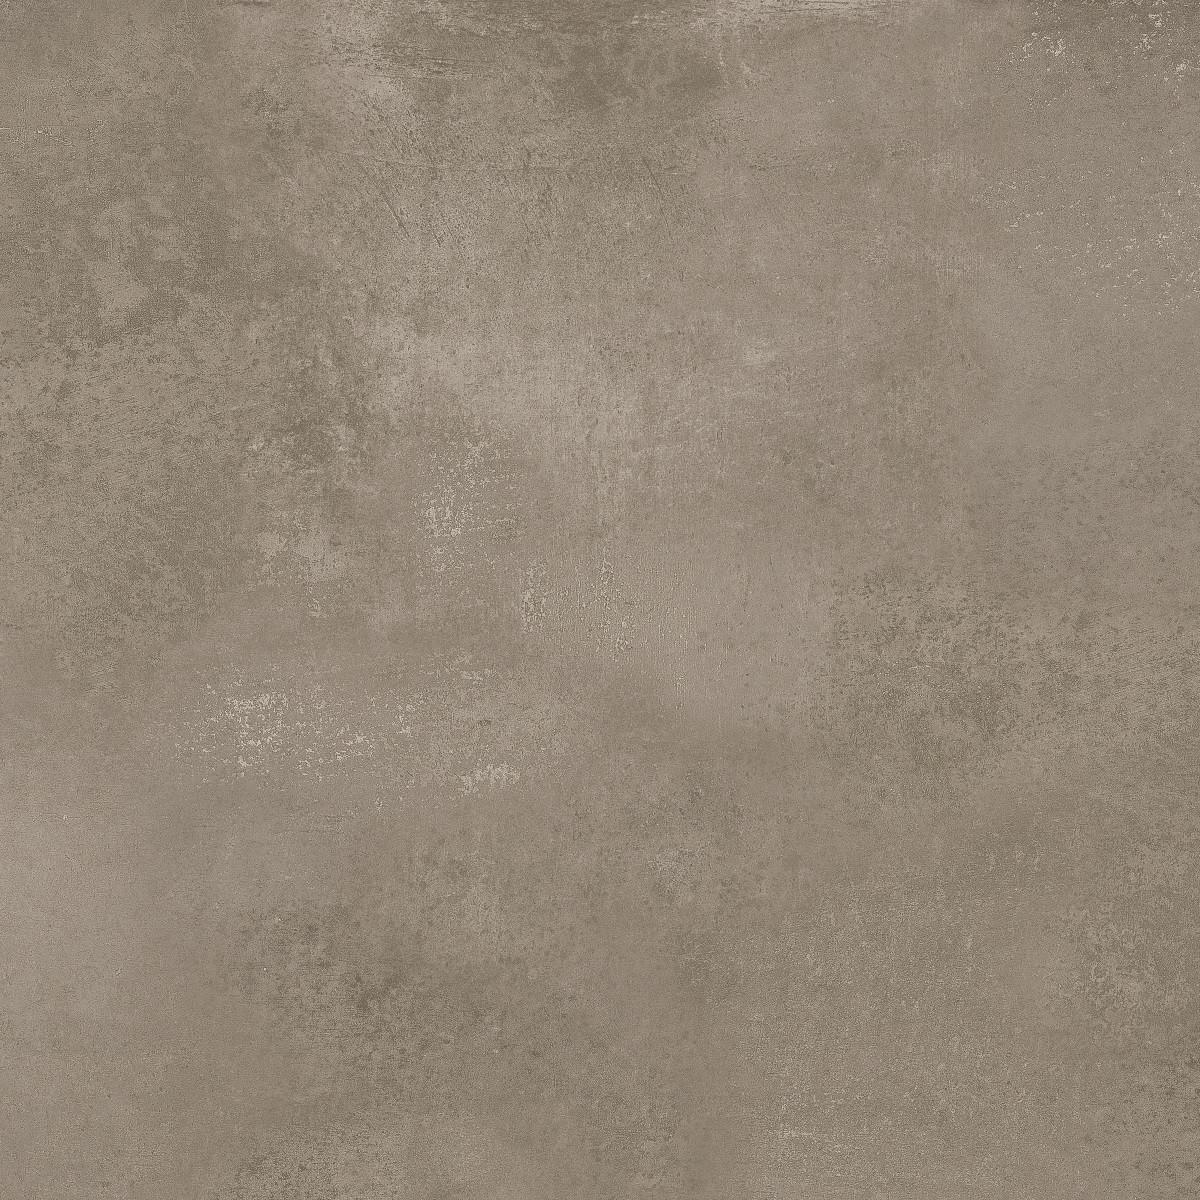 CEMENT GREY RECT. 60X60 - 1.44 m² - 3